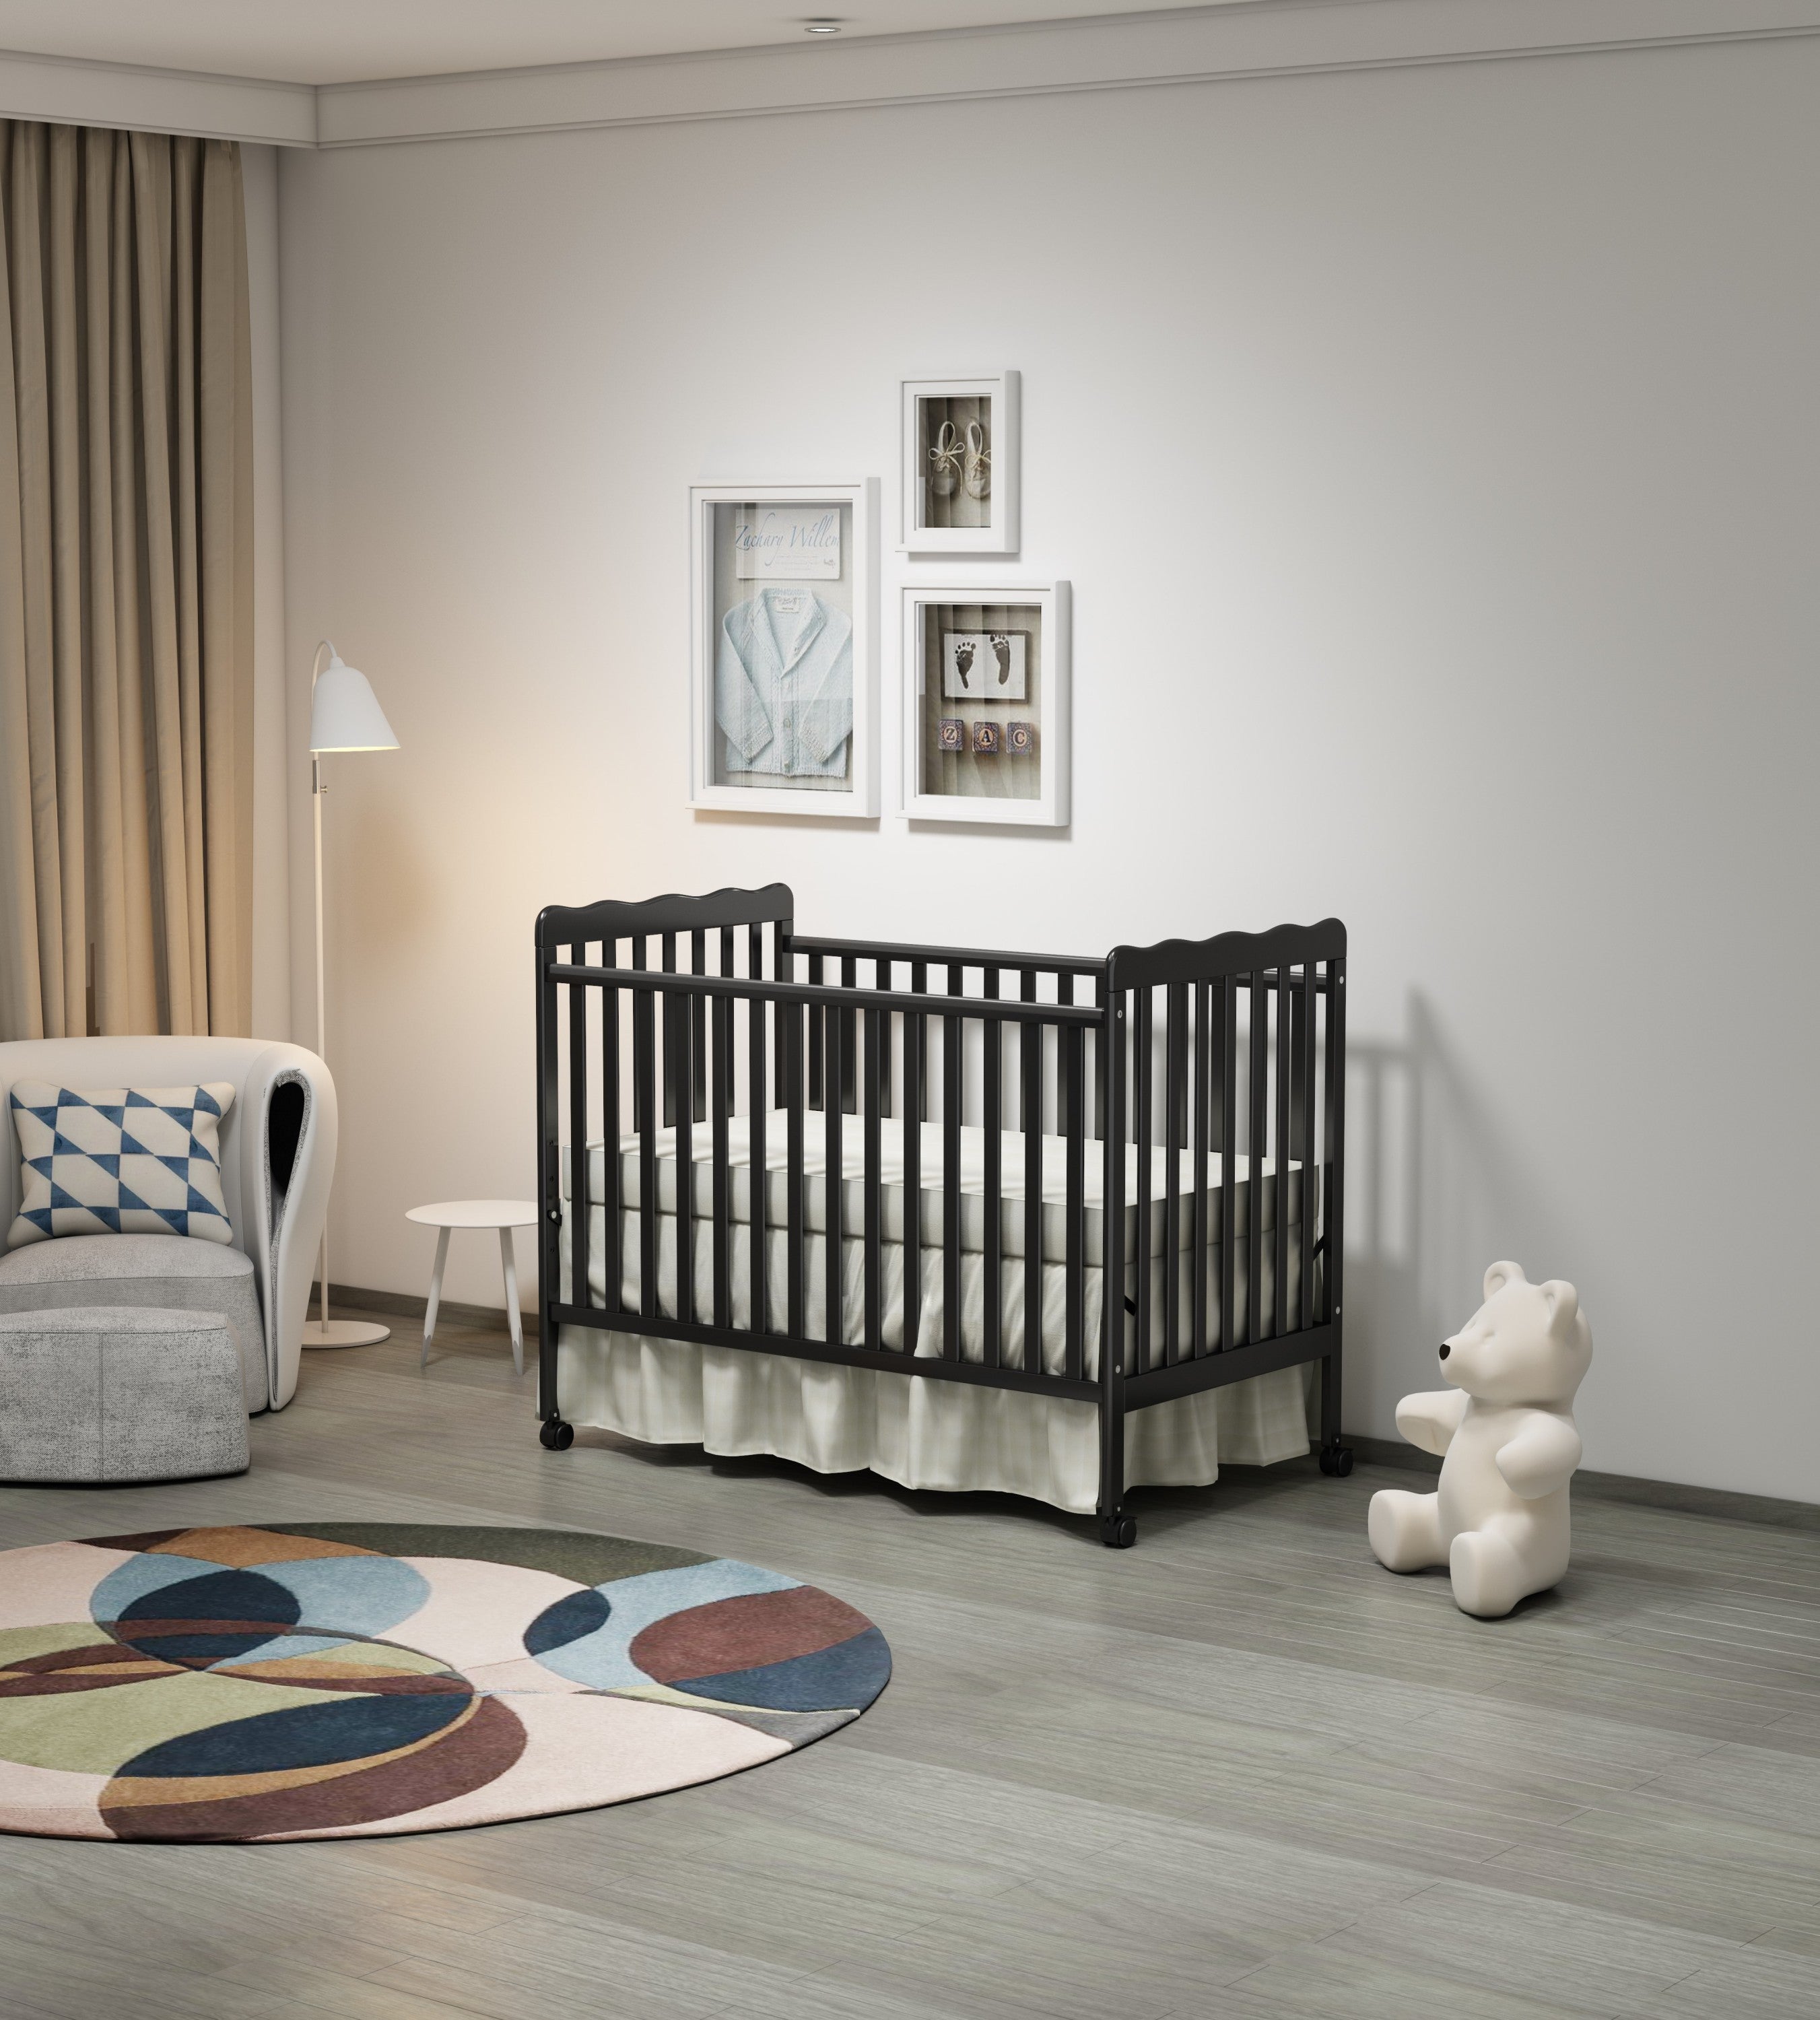 3-In-1 Convertible Crib In Storm BLACK, Made Of Sustainable Pinewood, Non-Toxic Finish, Comes With Locking Wheels, Wooden Nursery Furniture